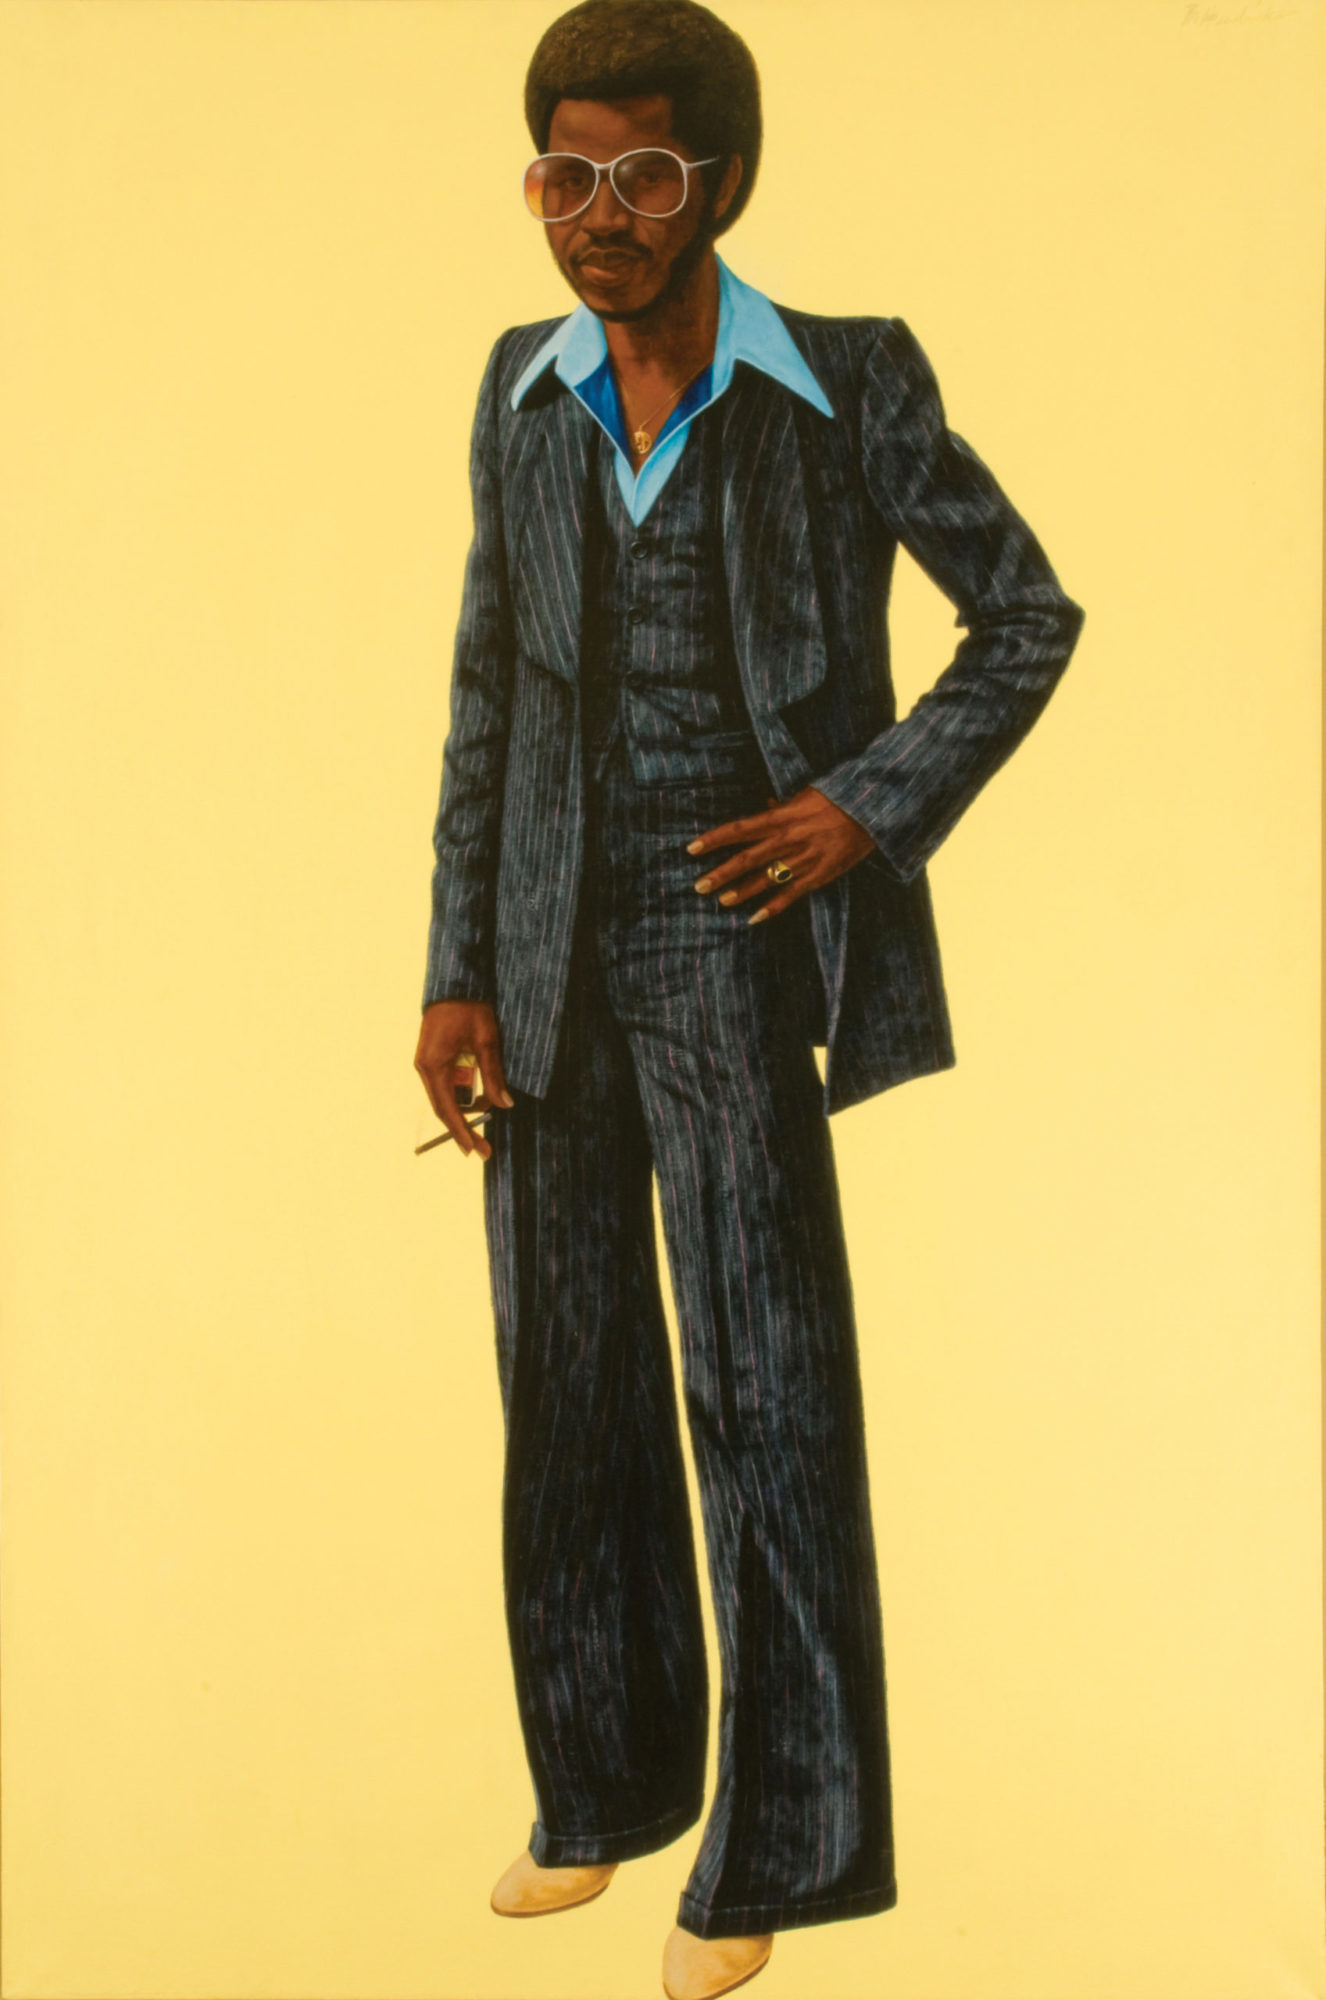 A fullbody portrait of a stereotypical 'pimp' wearing tinted aviators, a pinstripe suite with a wide-collared shirt underneath, a gold chain and ring on a bright yellow background